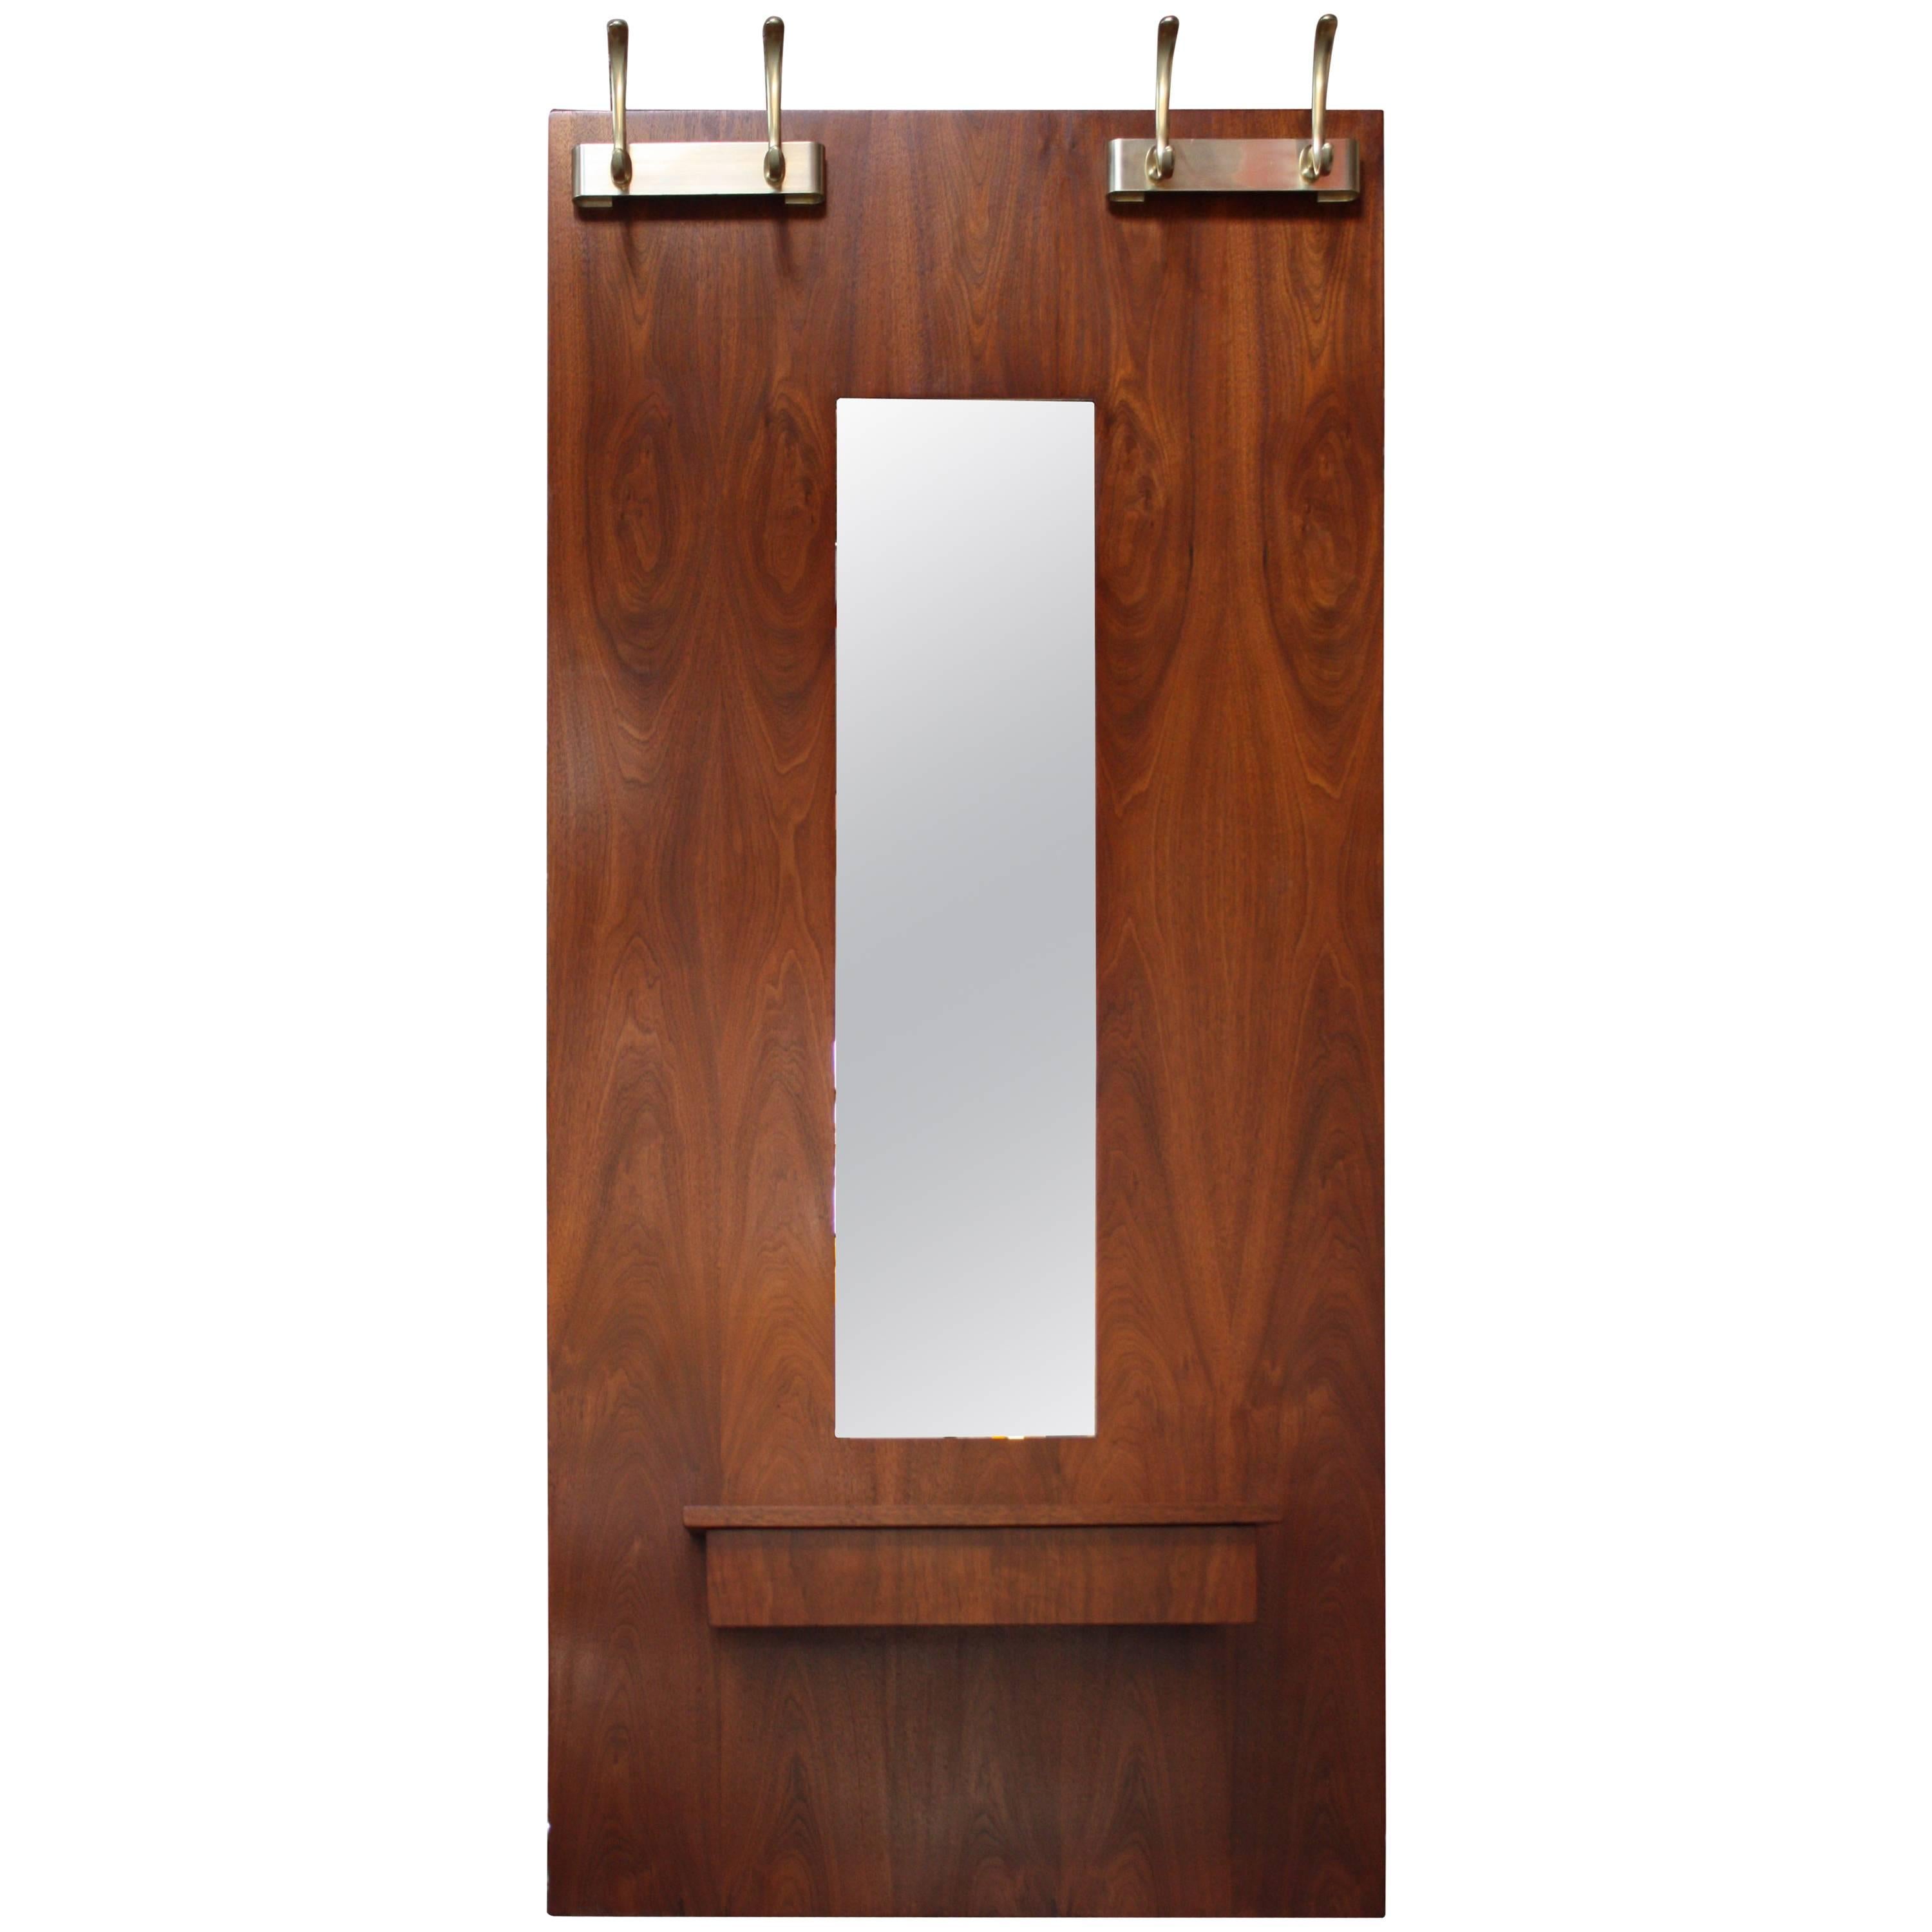 Large New Hope-Style Walnut and Aluminum Wall-Mounted Mirror/Vanity